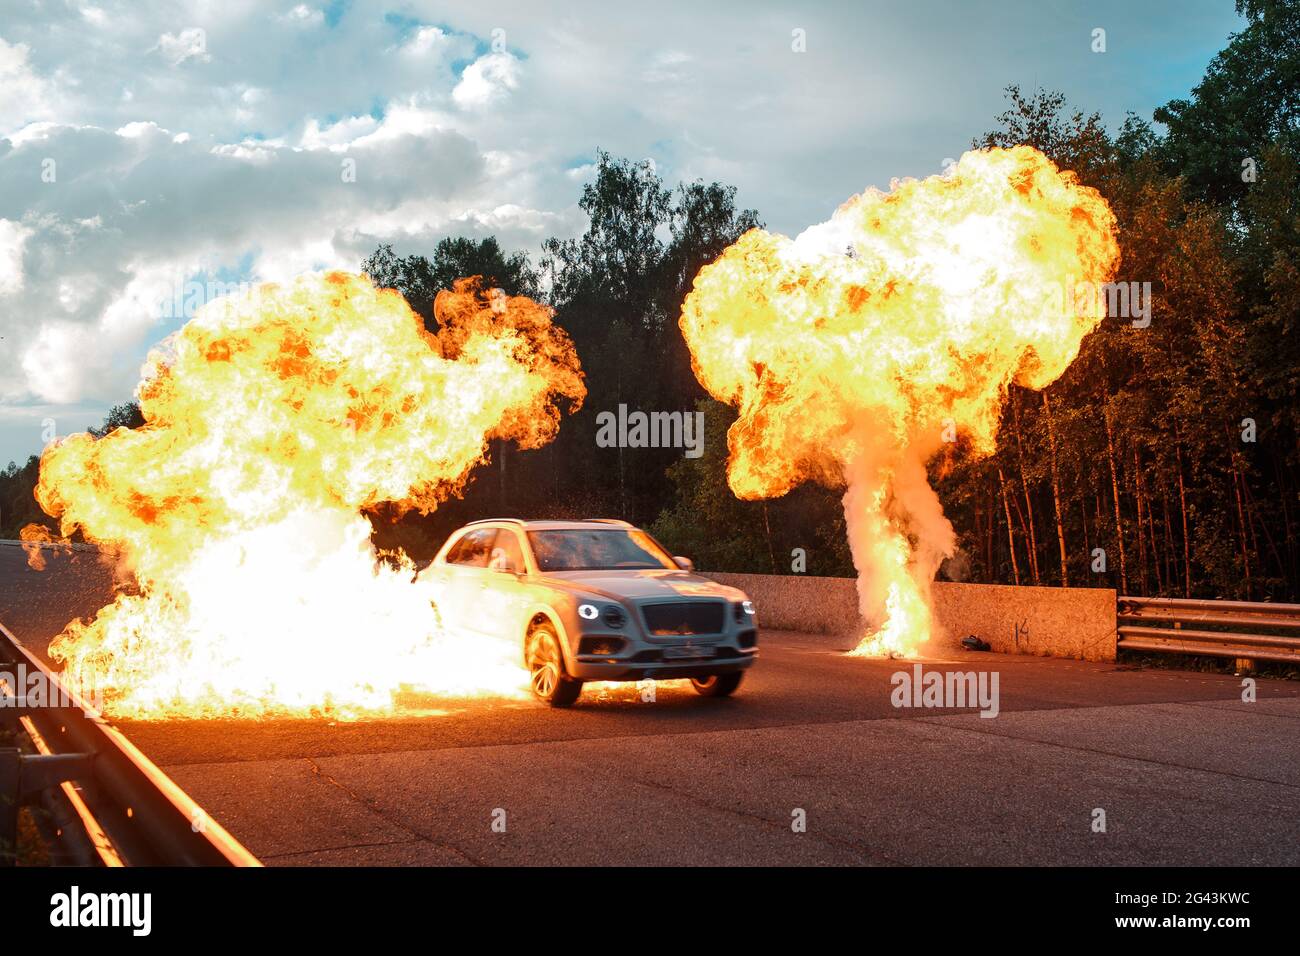 Street racing and explosion Stock Photo